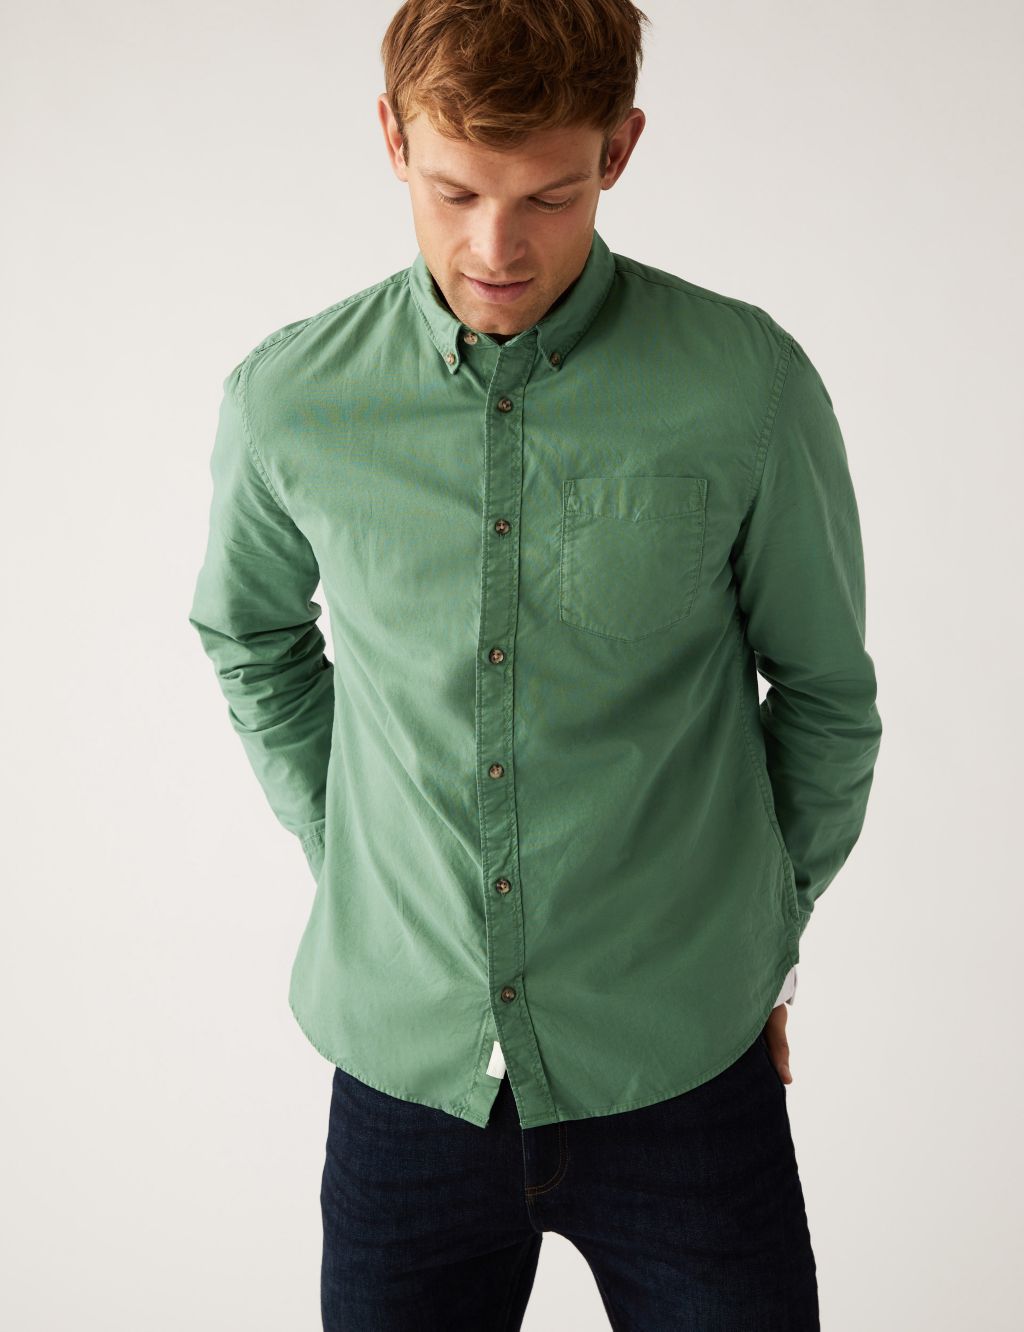 Pure Cotton Garment Dyed Oxford Shirt image 1